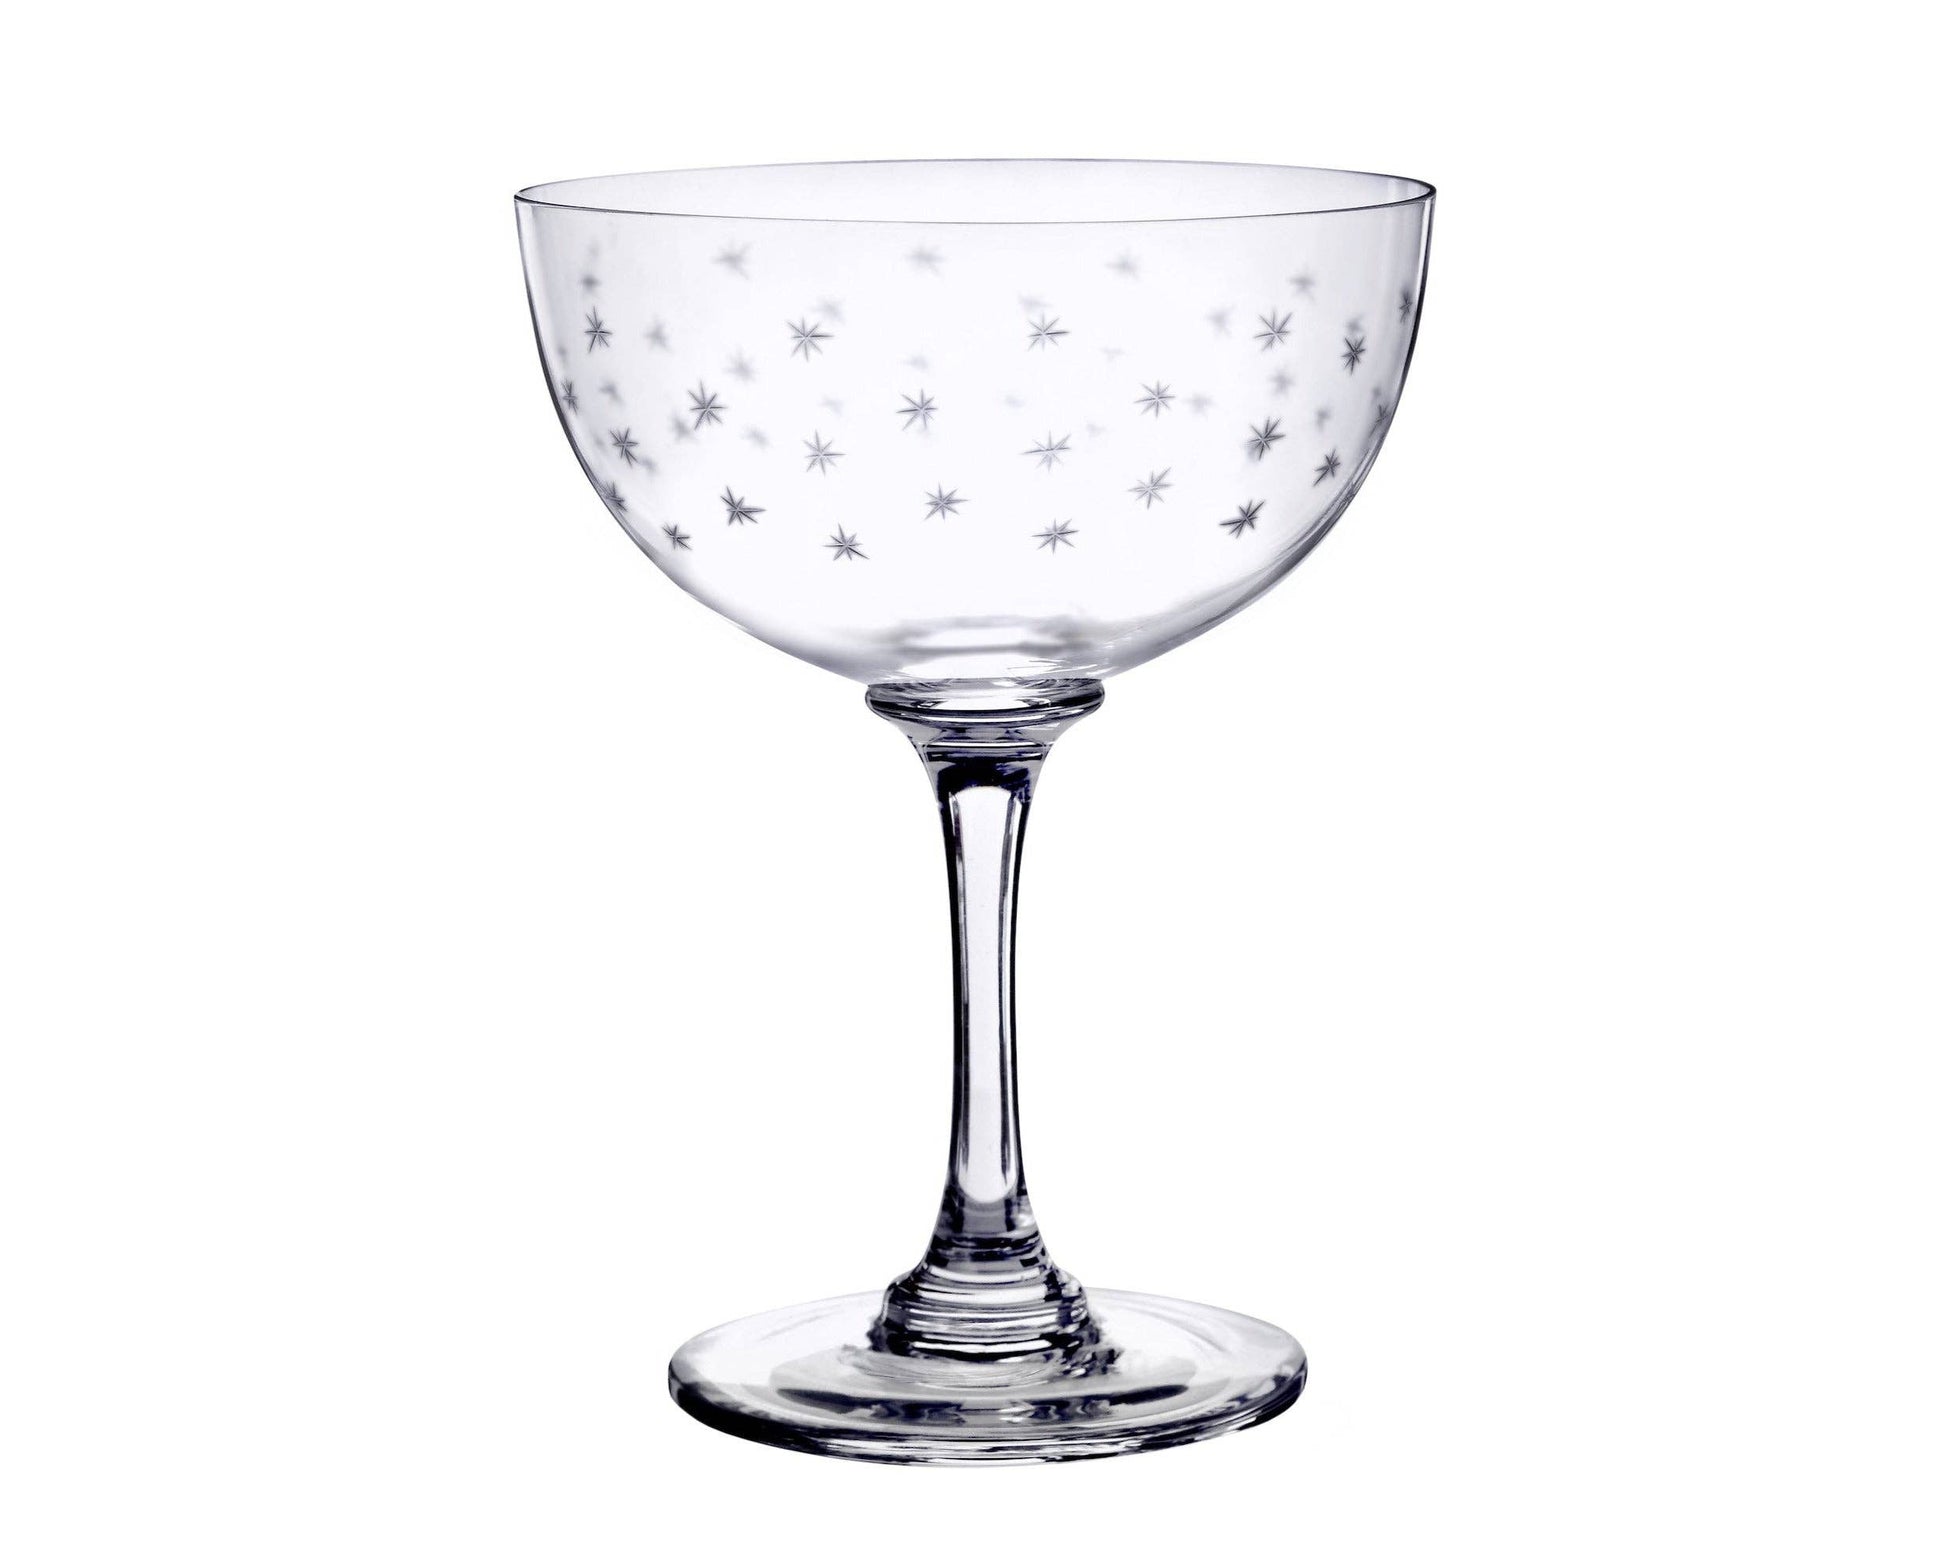 Six crystal champagne glasses with star accents for a touch of sophistication